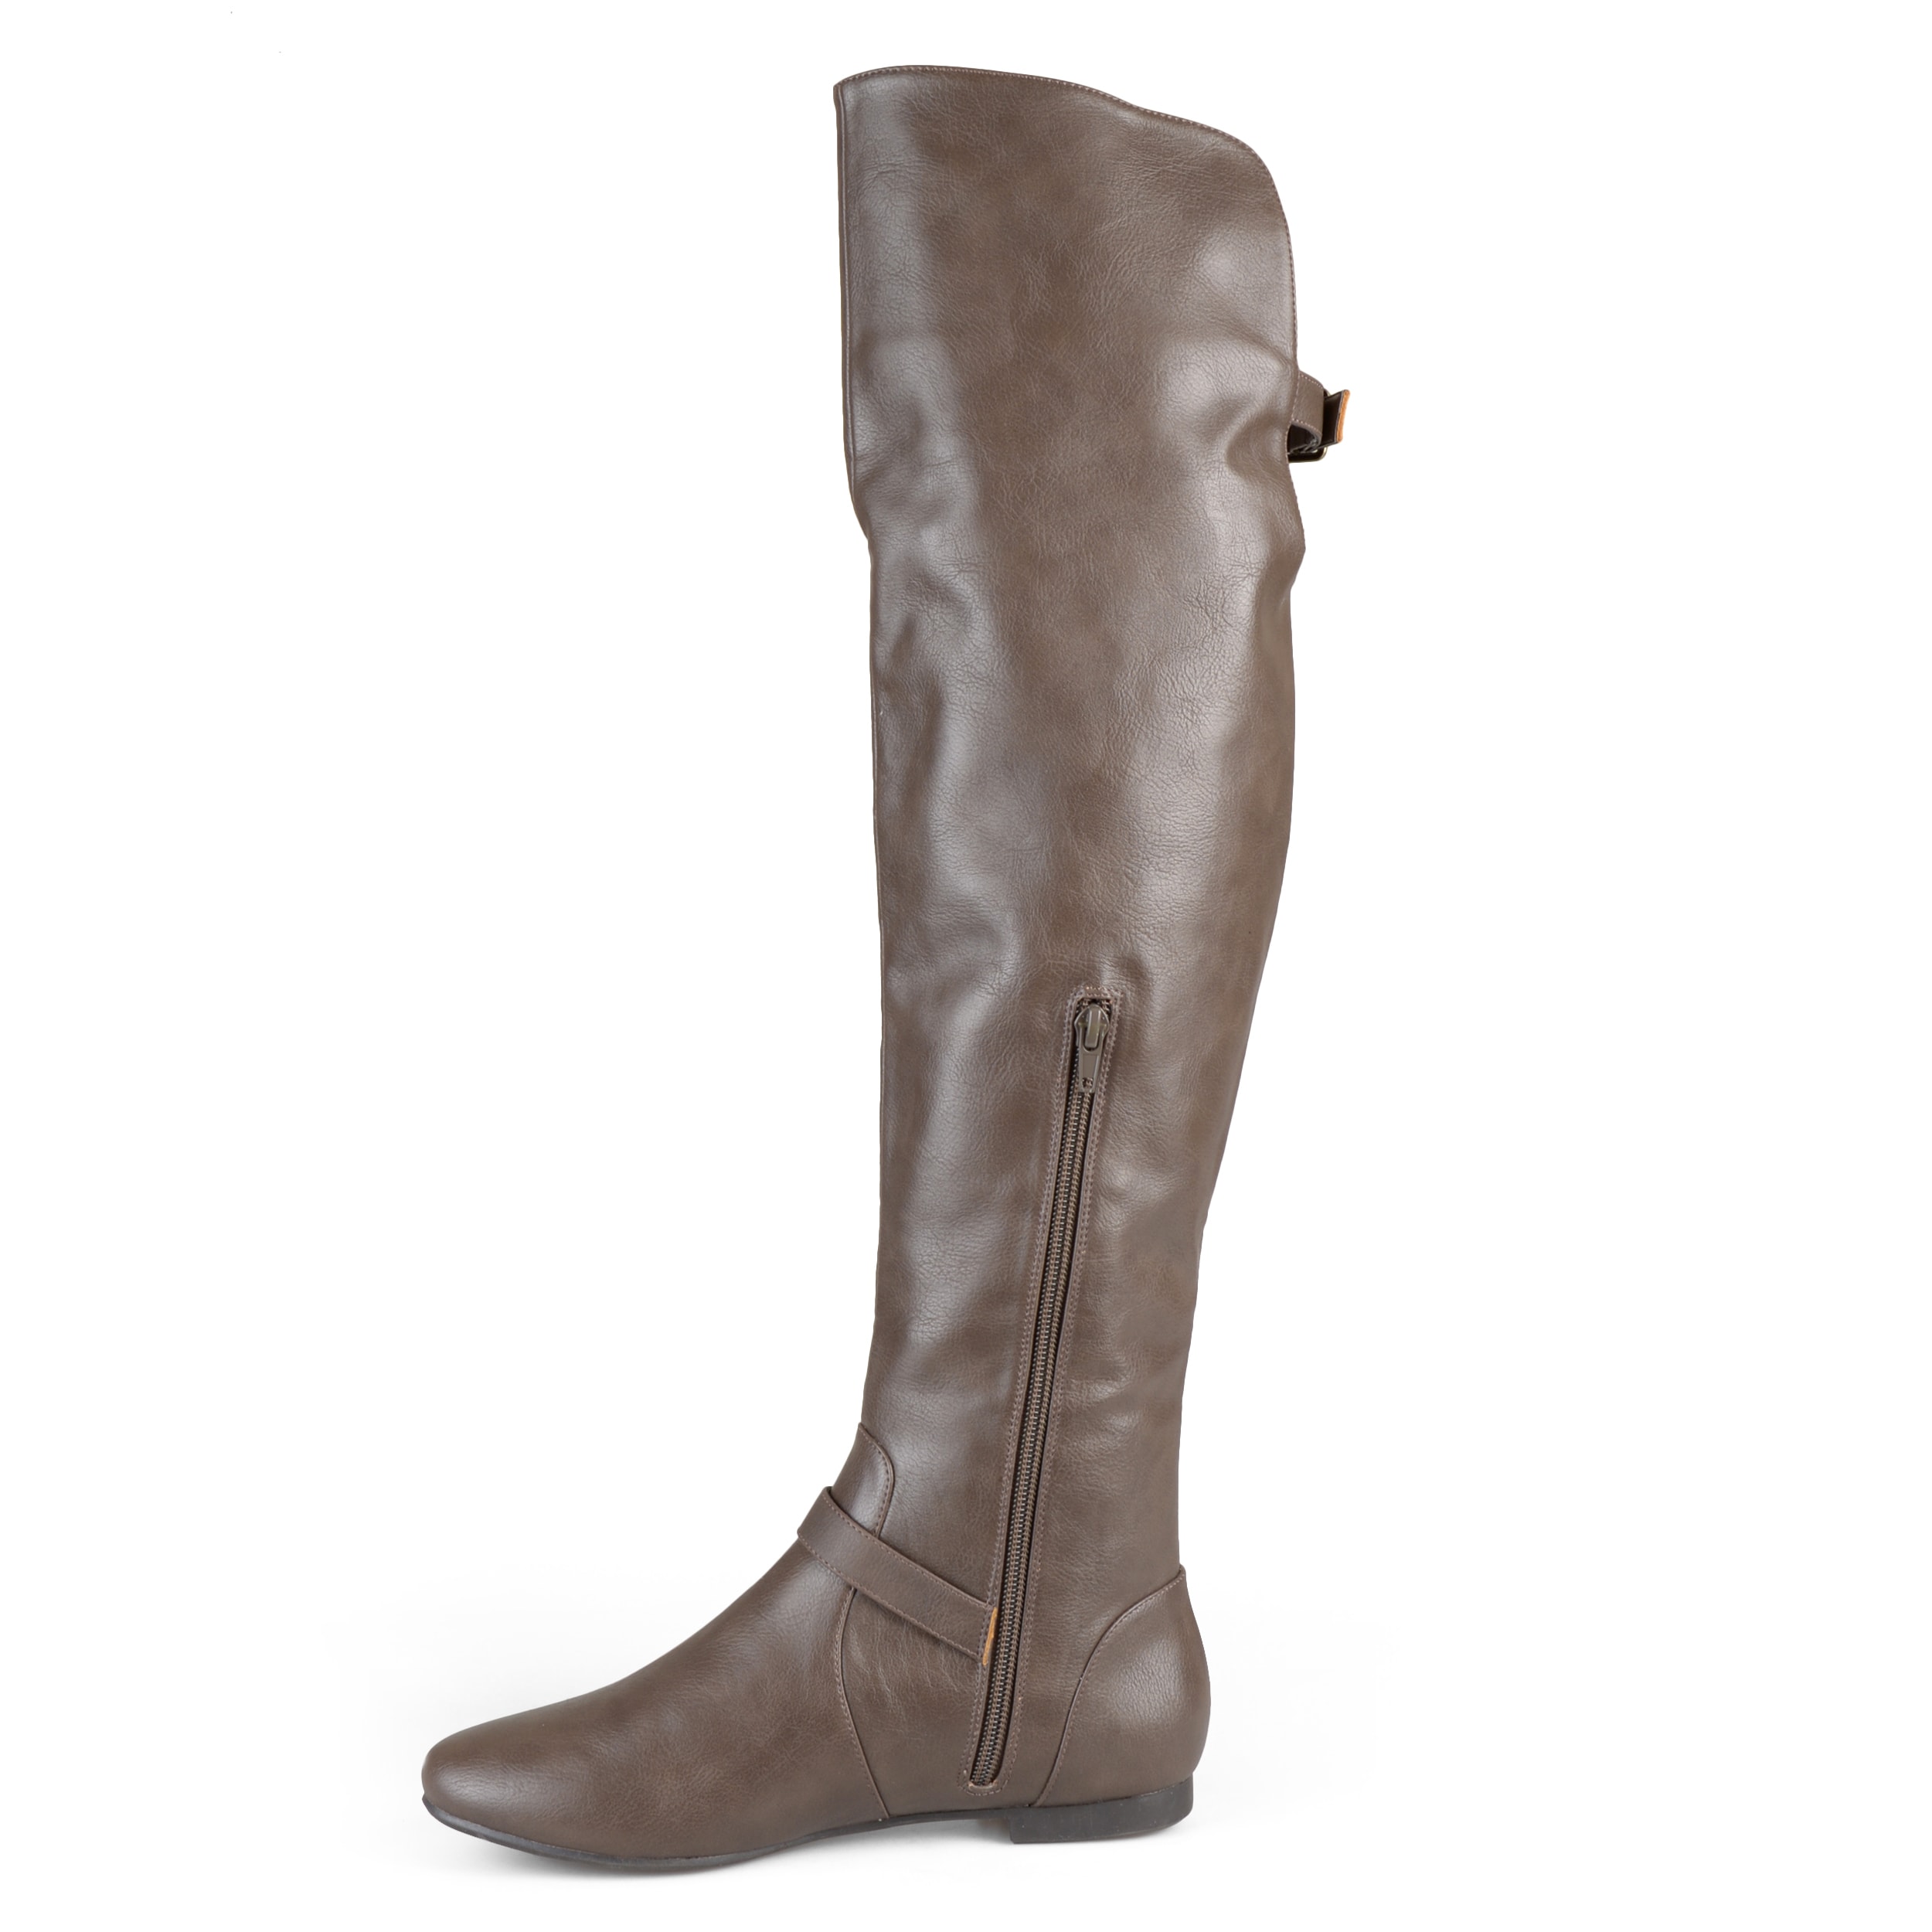 journee collection loft over the knee boot